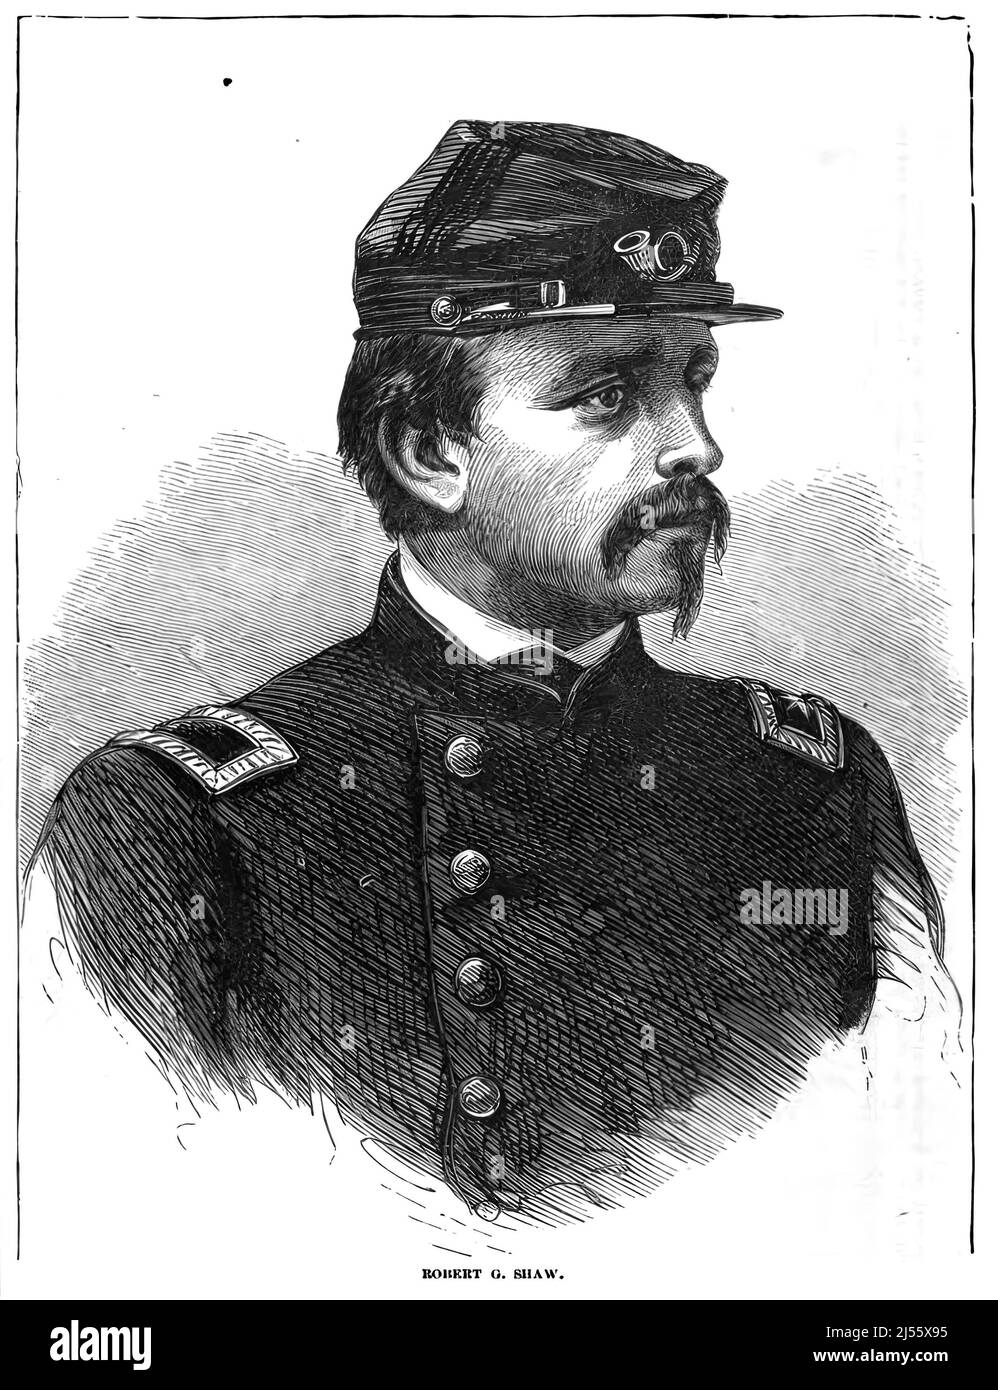 Portrait of Robert Gould Shaw, Union Army Colonel in the American Civil War. 19th century illustration Stock Photo